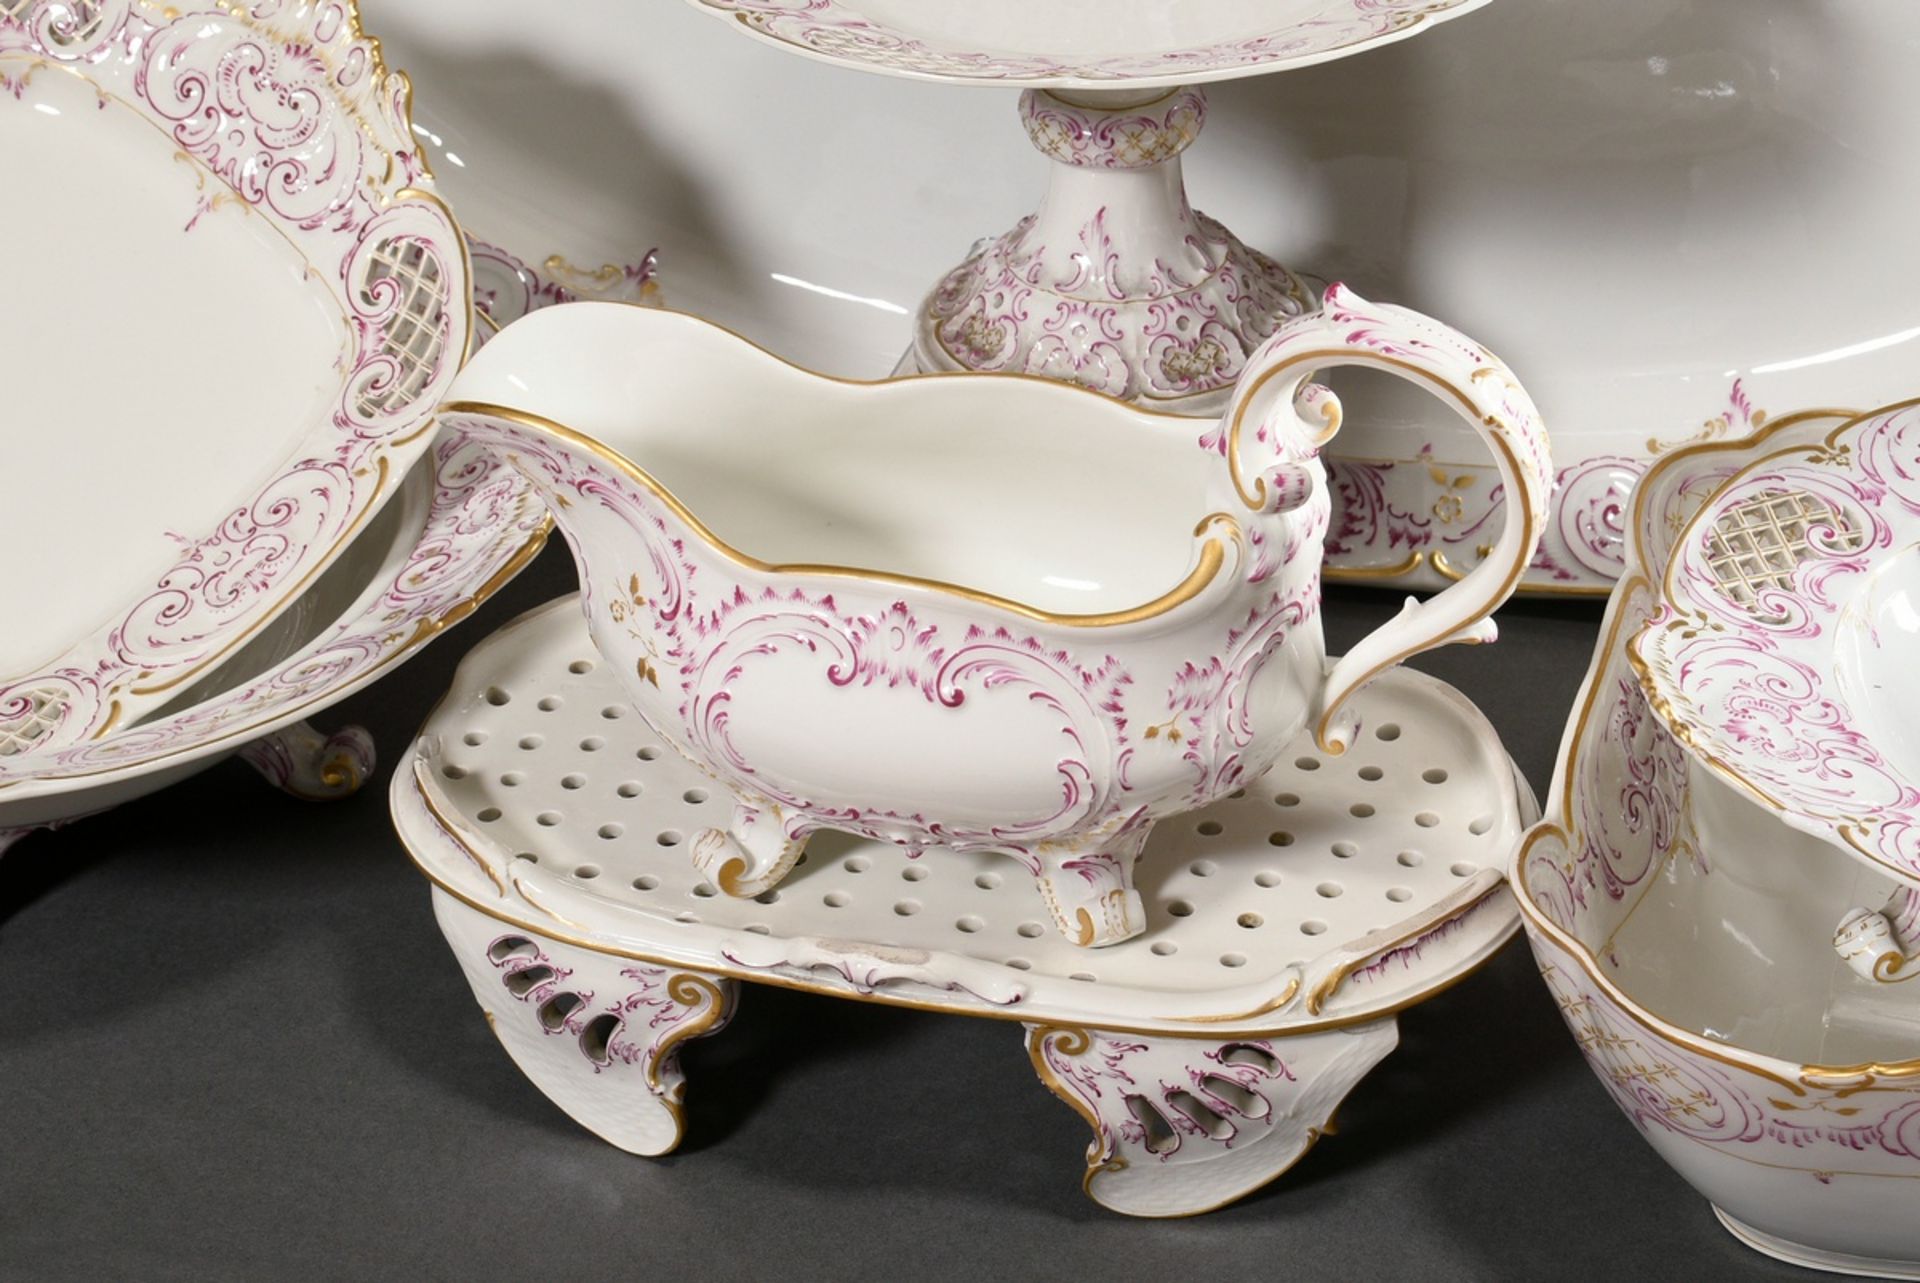 69 Pieces KPM dinner service in Rococo form with purple and gold staffage, red imperial orb mark, c - Image 4 of 22